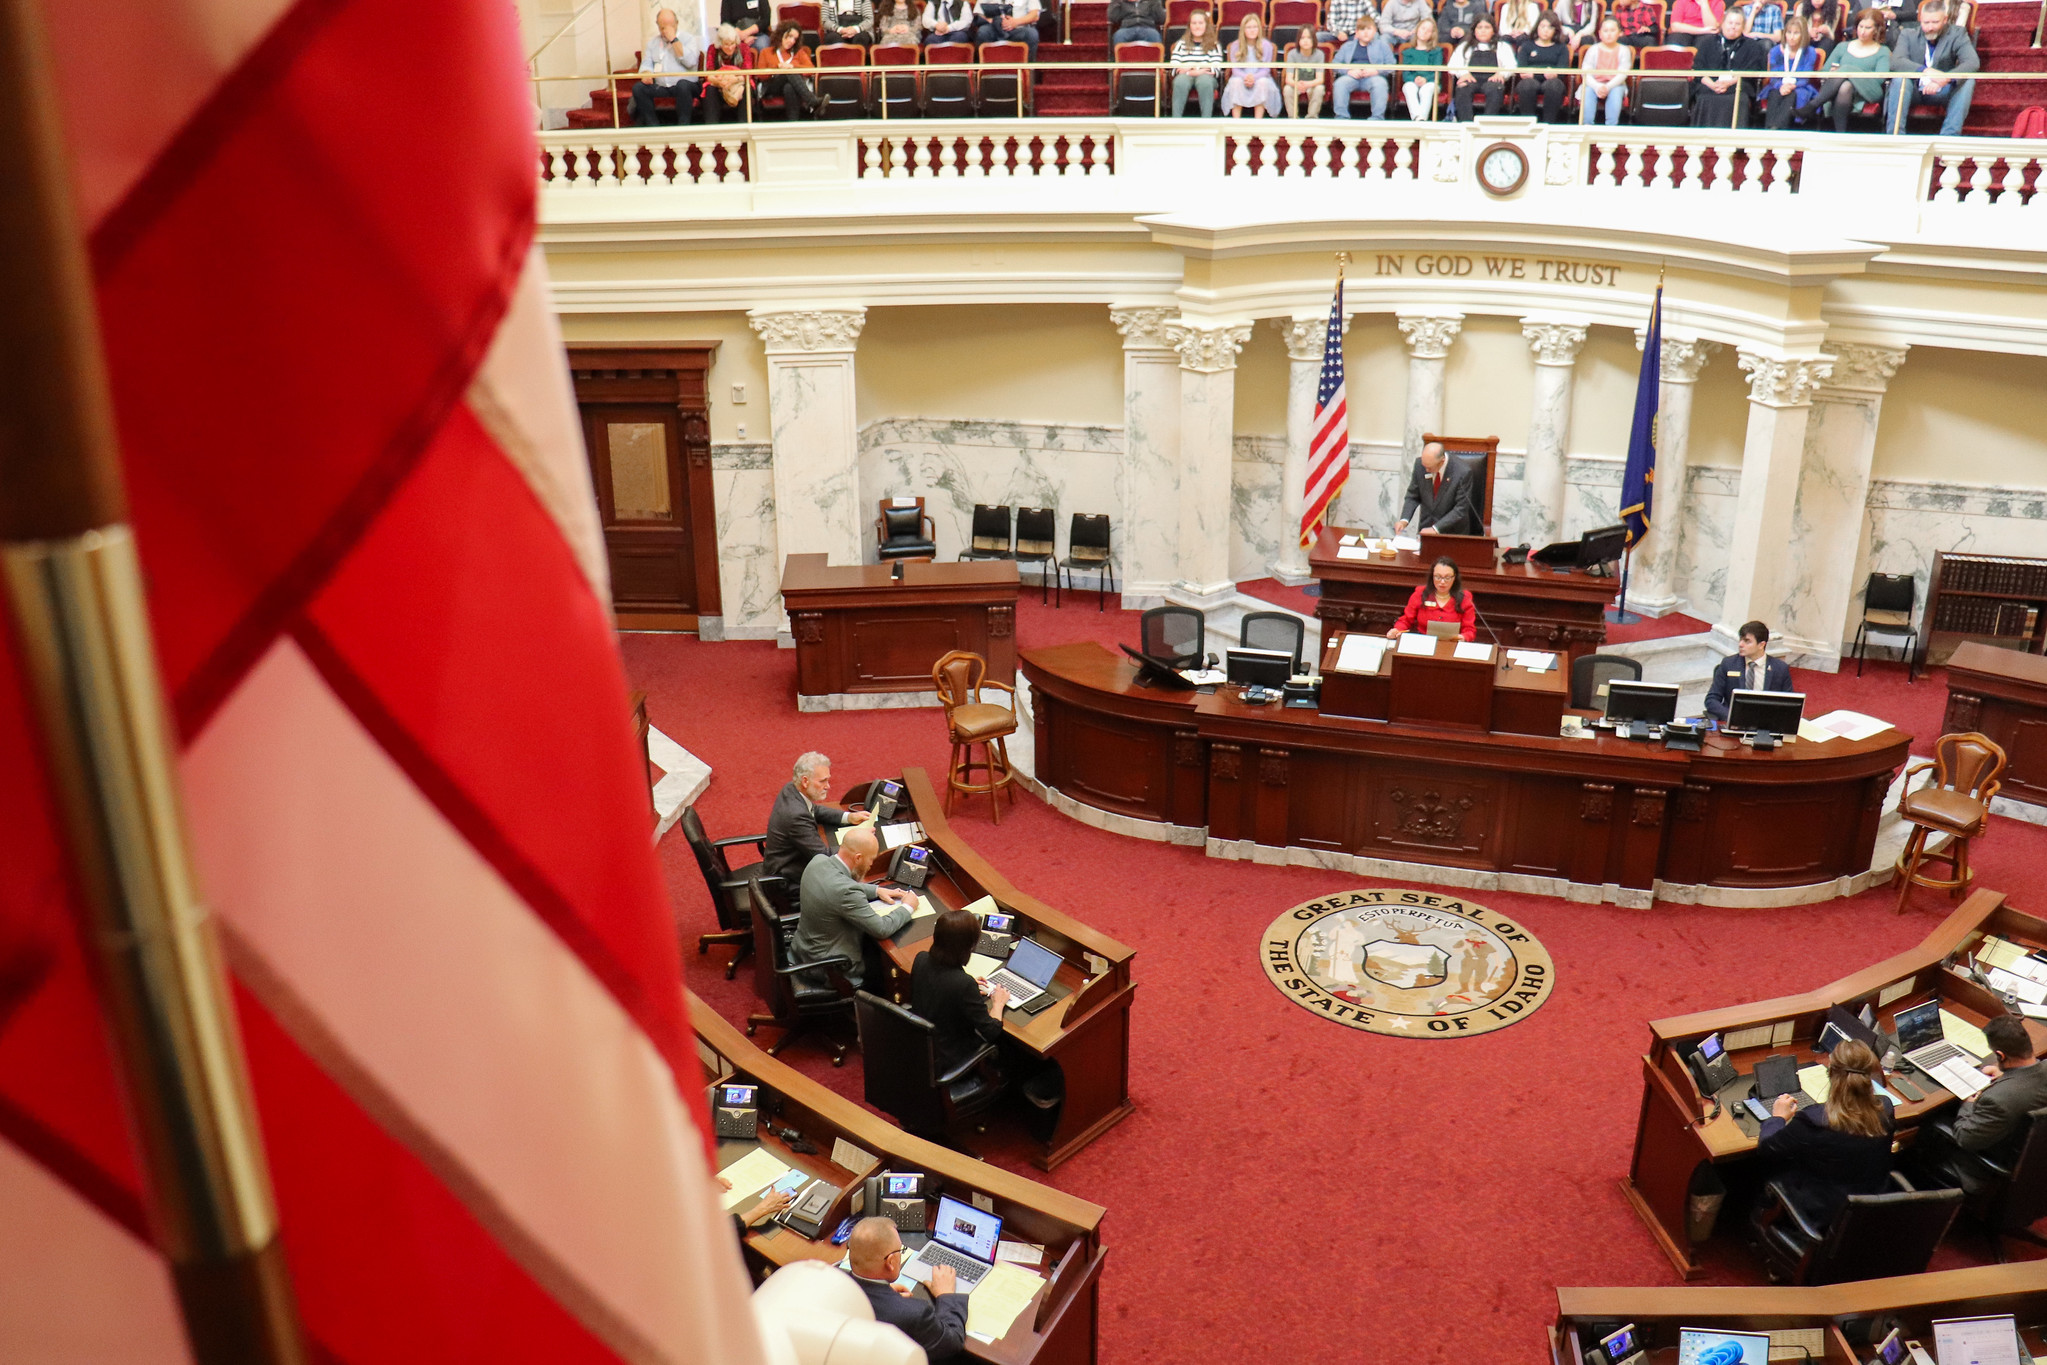 Primary Election Results in Senate Leadership Shakeup